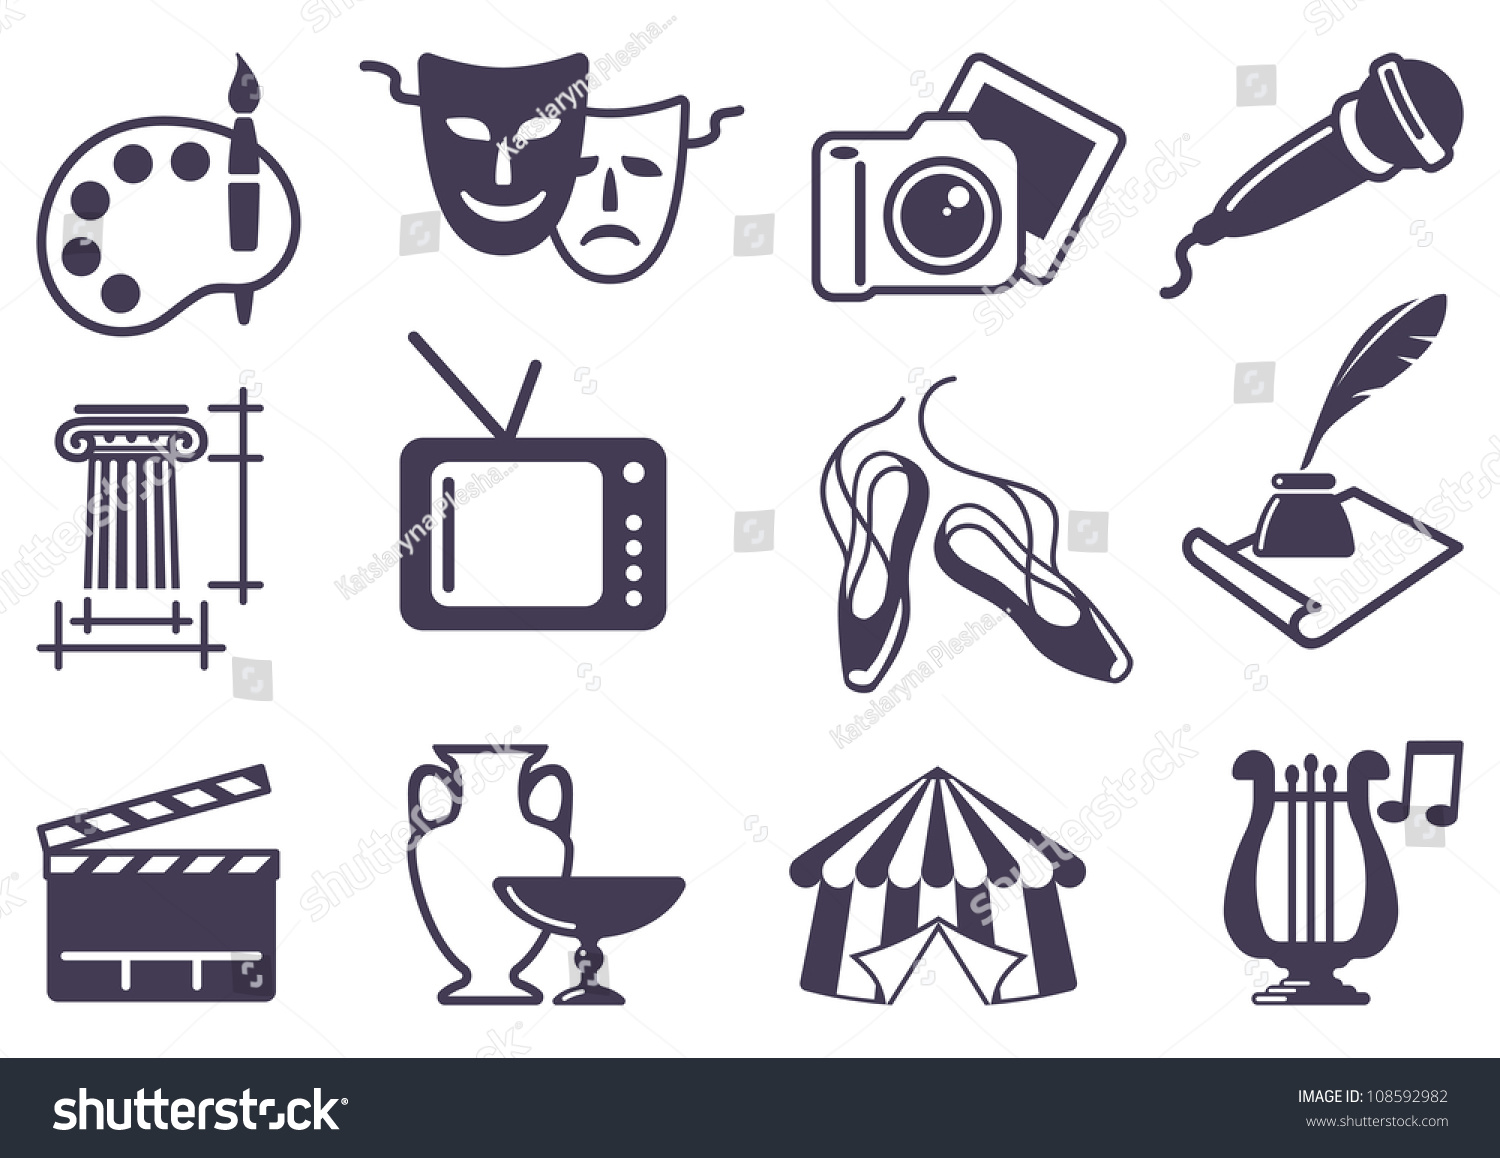 Culture And Art Vector Icons  108592982 : Shutterstock